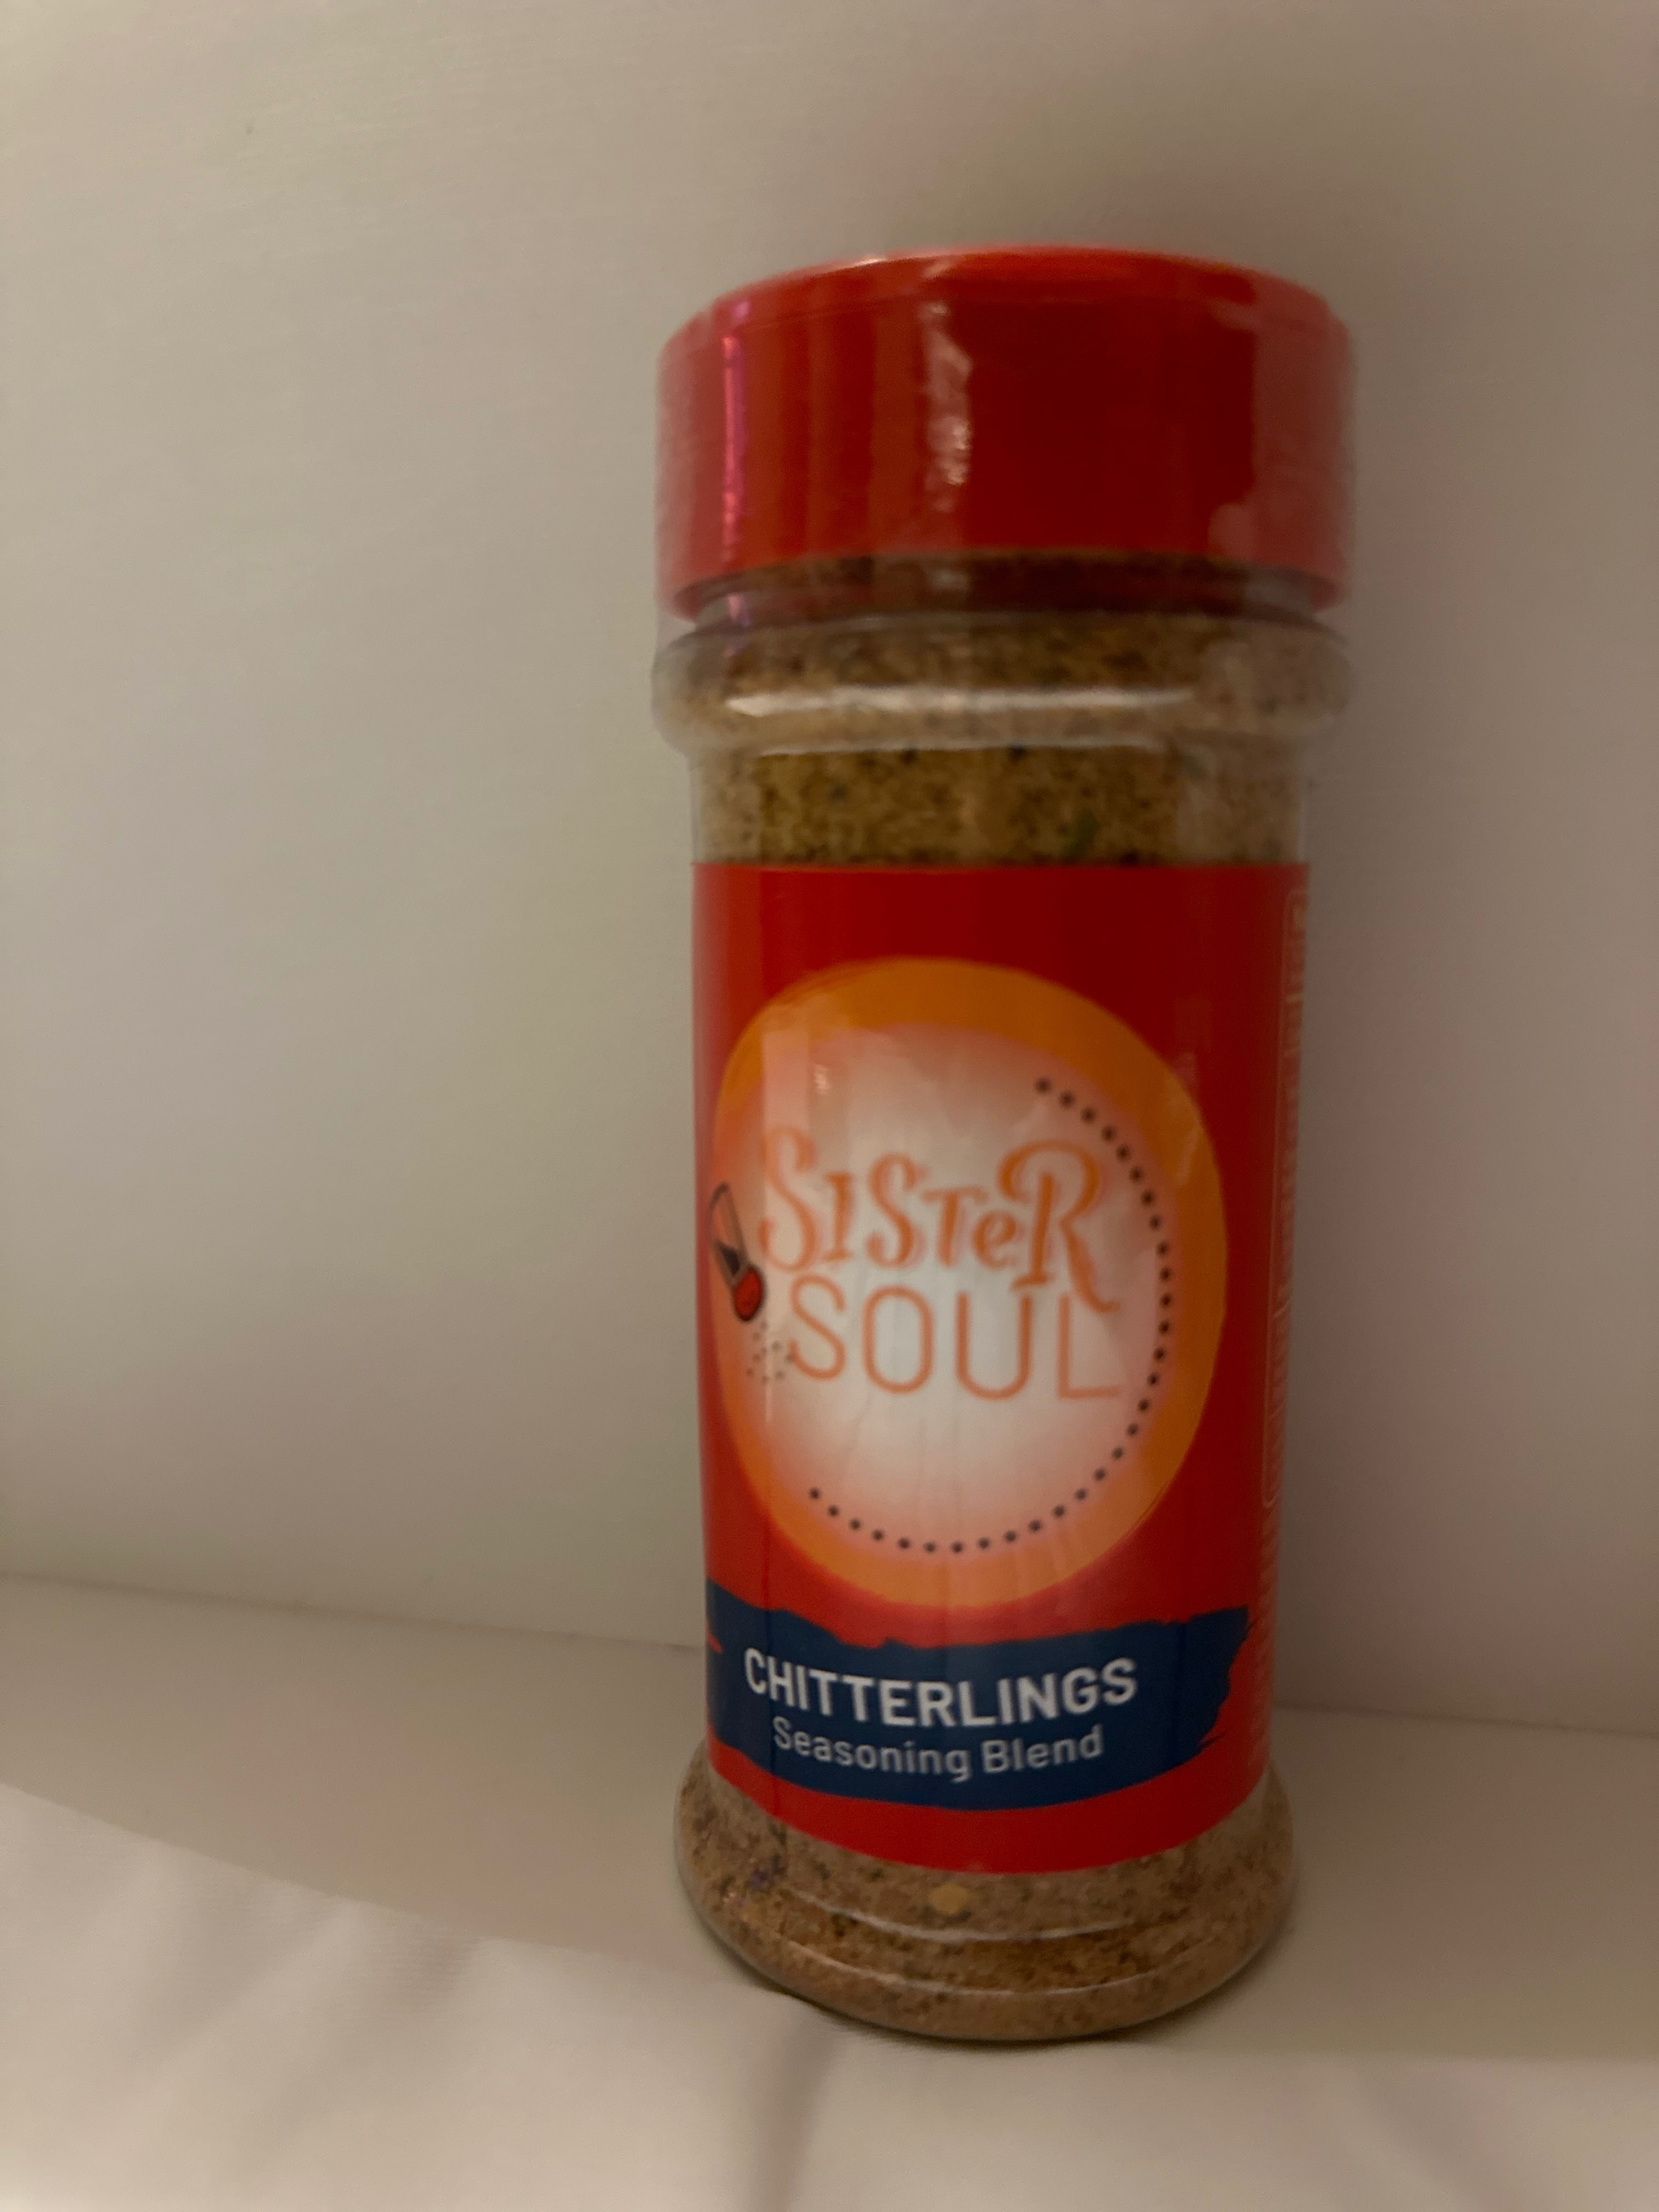 Feisty Spices Gourmet Chitterlings Seasoning, Zero Calories, Low Sodium, 8  Oz, Unique Blend. Seasoning for Chitterlings 